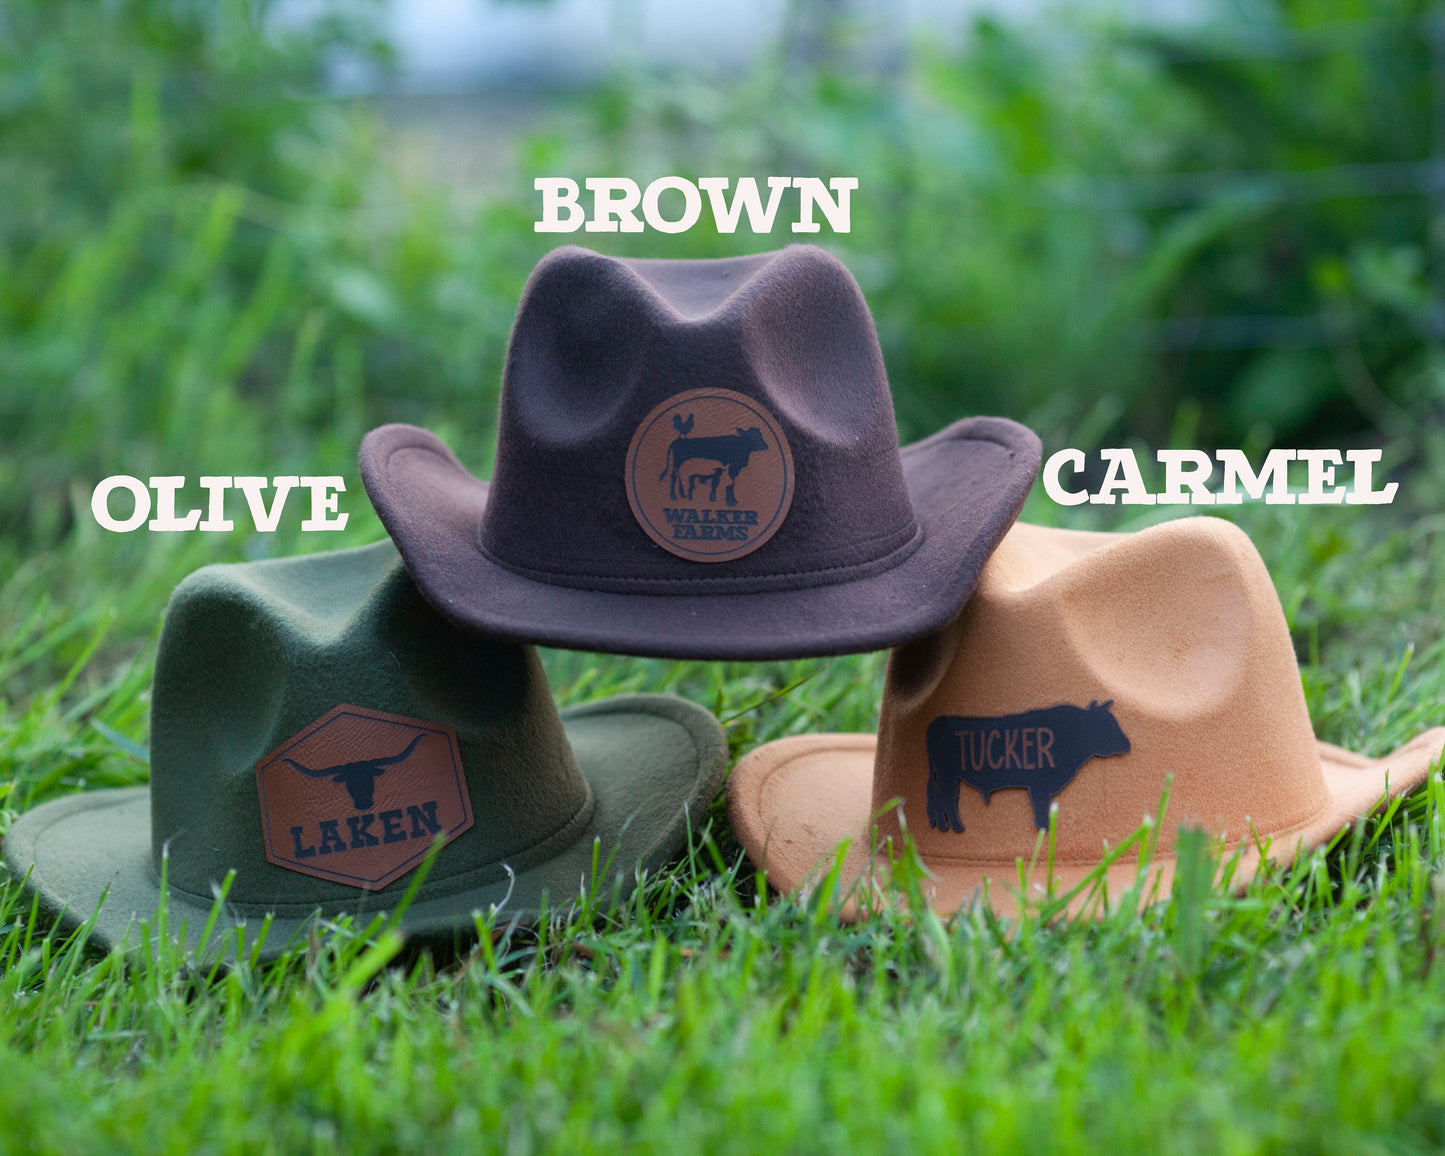 Cowboy Hat Farm With Name for kids, Kids cowboy hat, kids cowboy costume, leather patch hat, custom name design, western kids